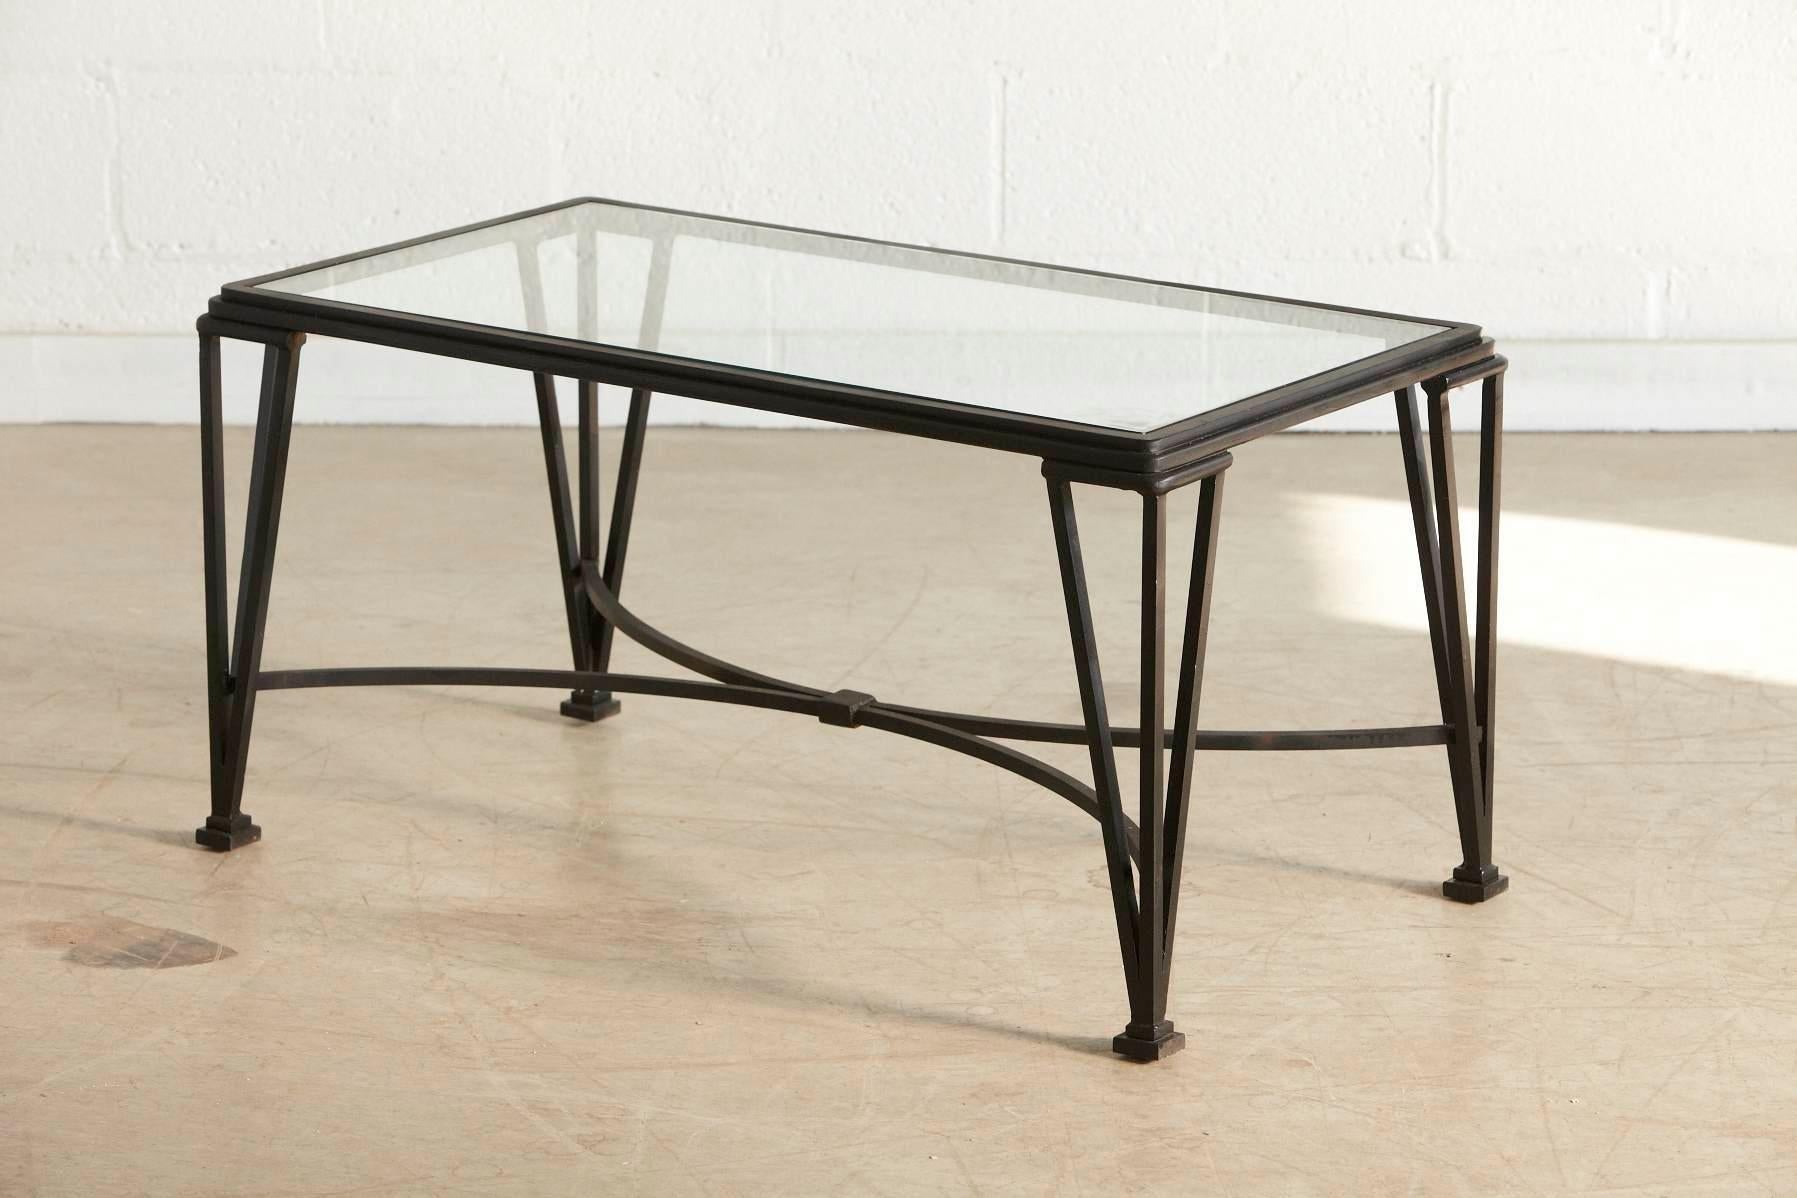 wrought iron table with glass top -china -b2b -forum -blog -wikipedia -.cn -.gov -alibaba